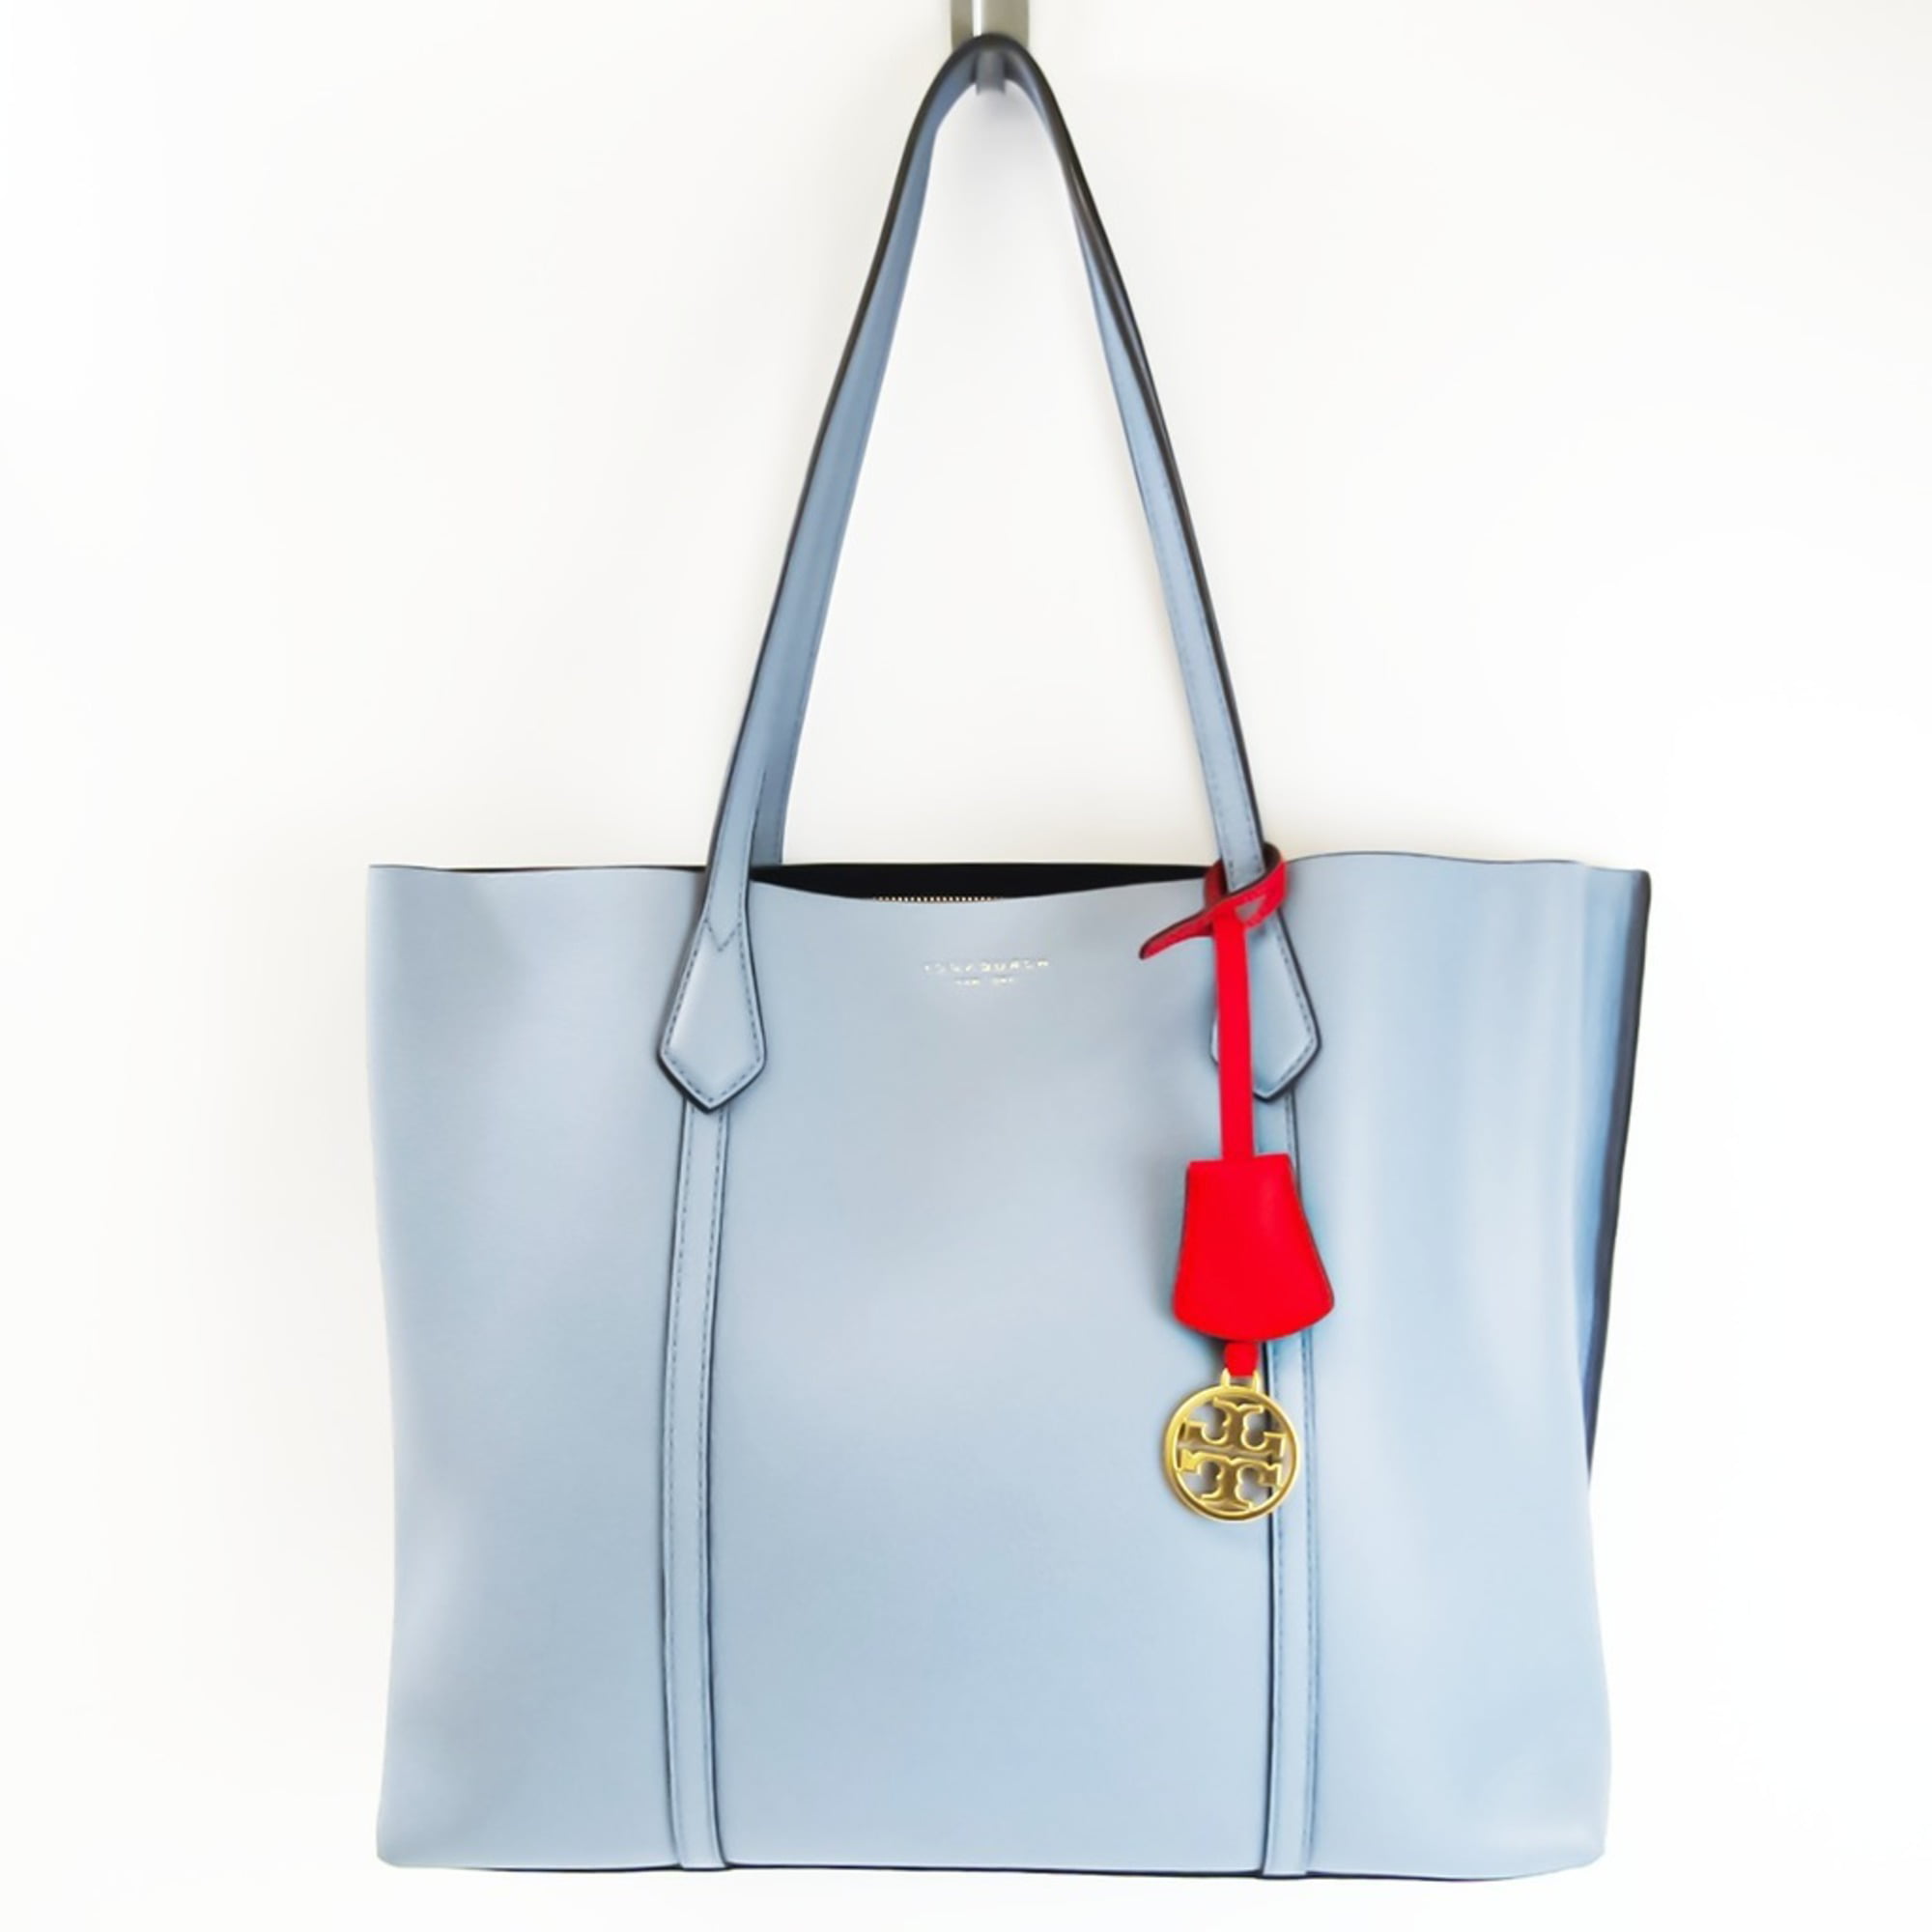 Authenticated Used Tory Burch Perry Triple Women's Leather Tote Bag Light  Blue Gray